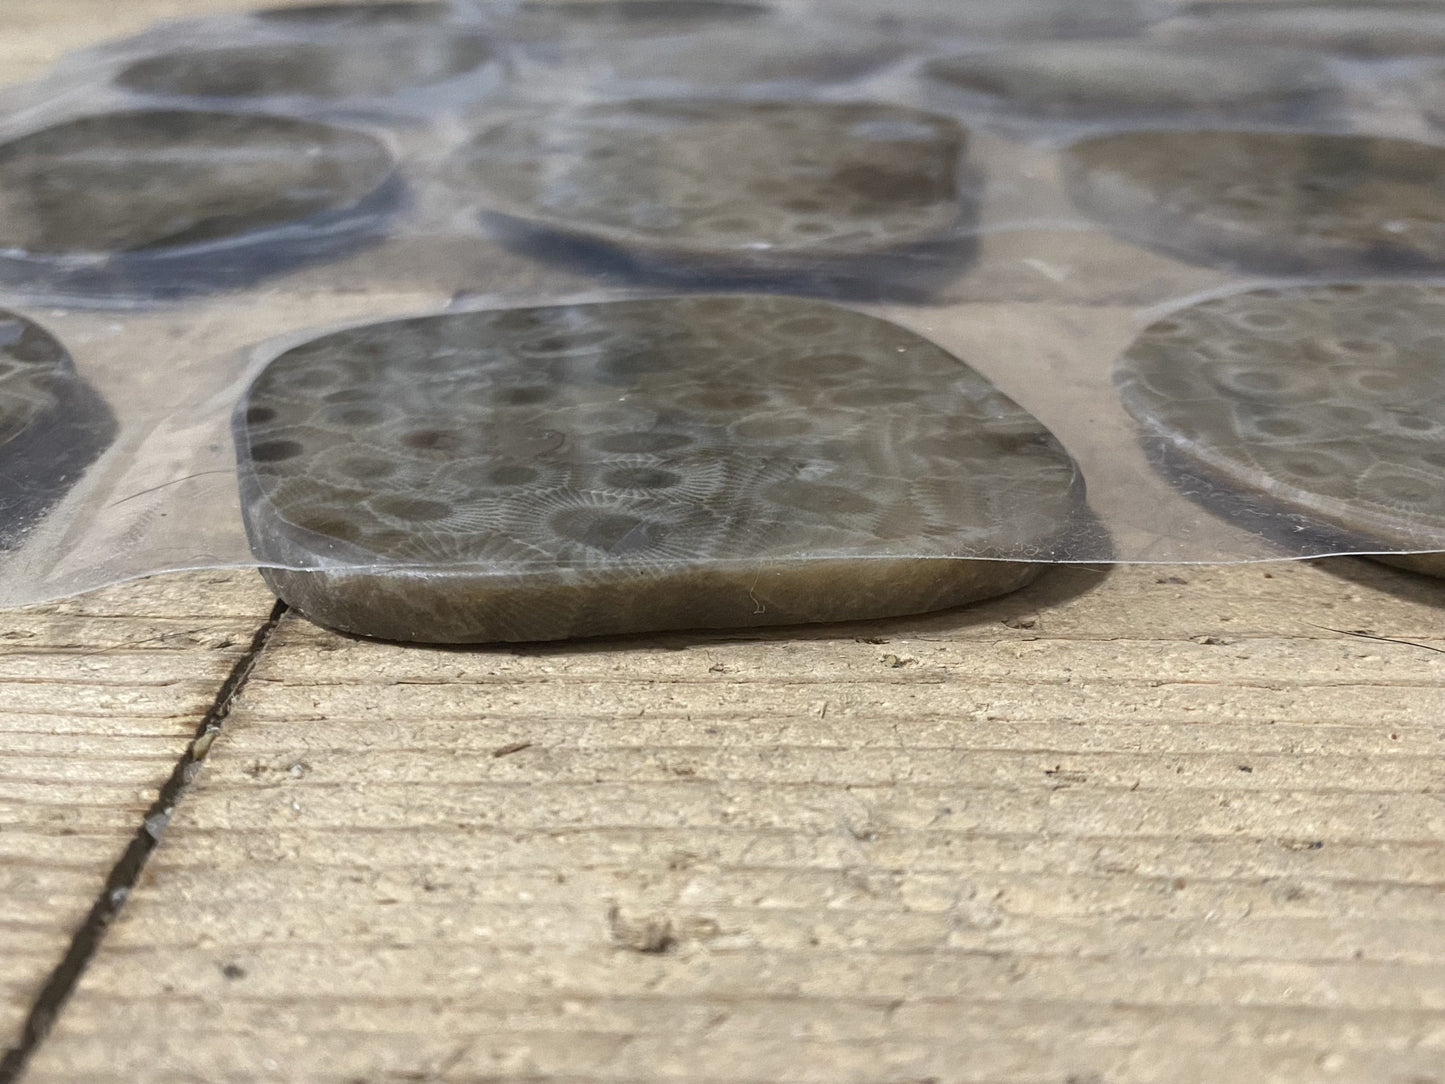 Close up of the side view on the tile square. Shows thickness of the petoskey stones.